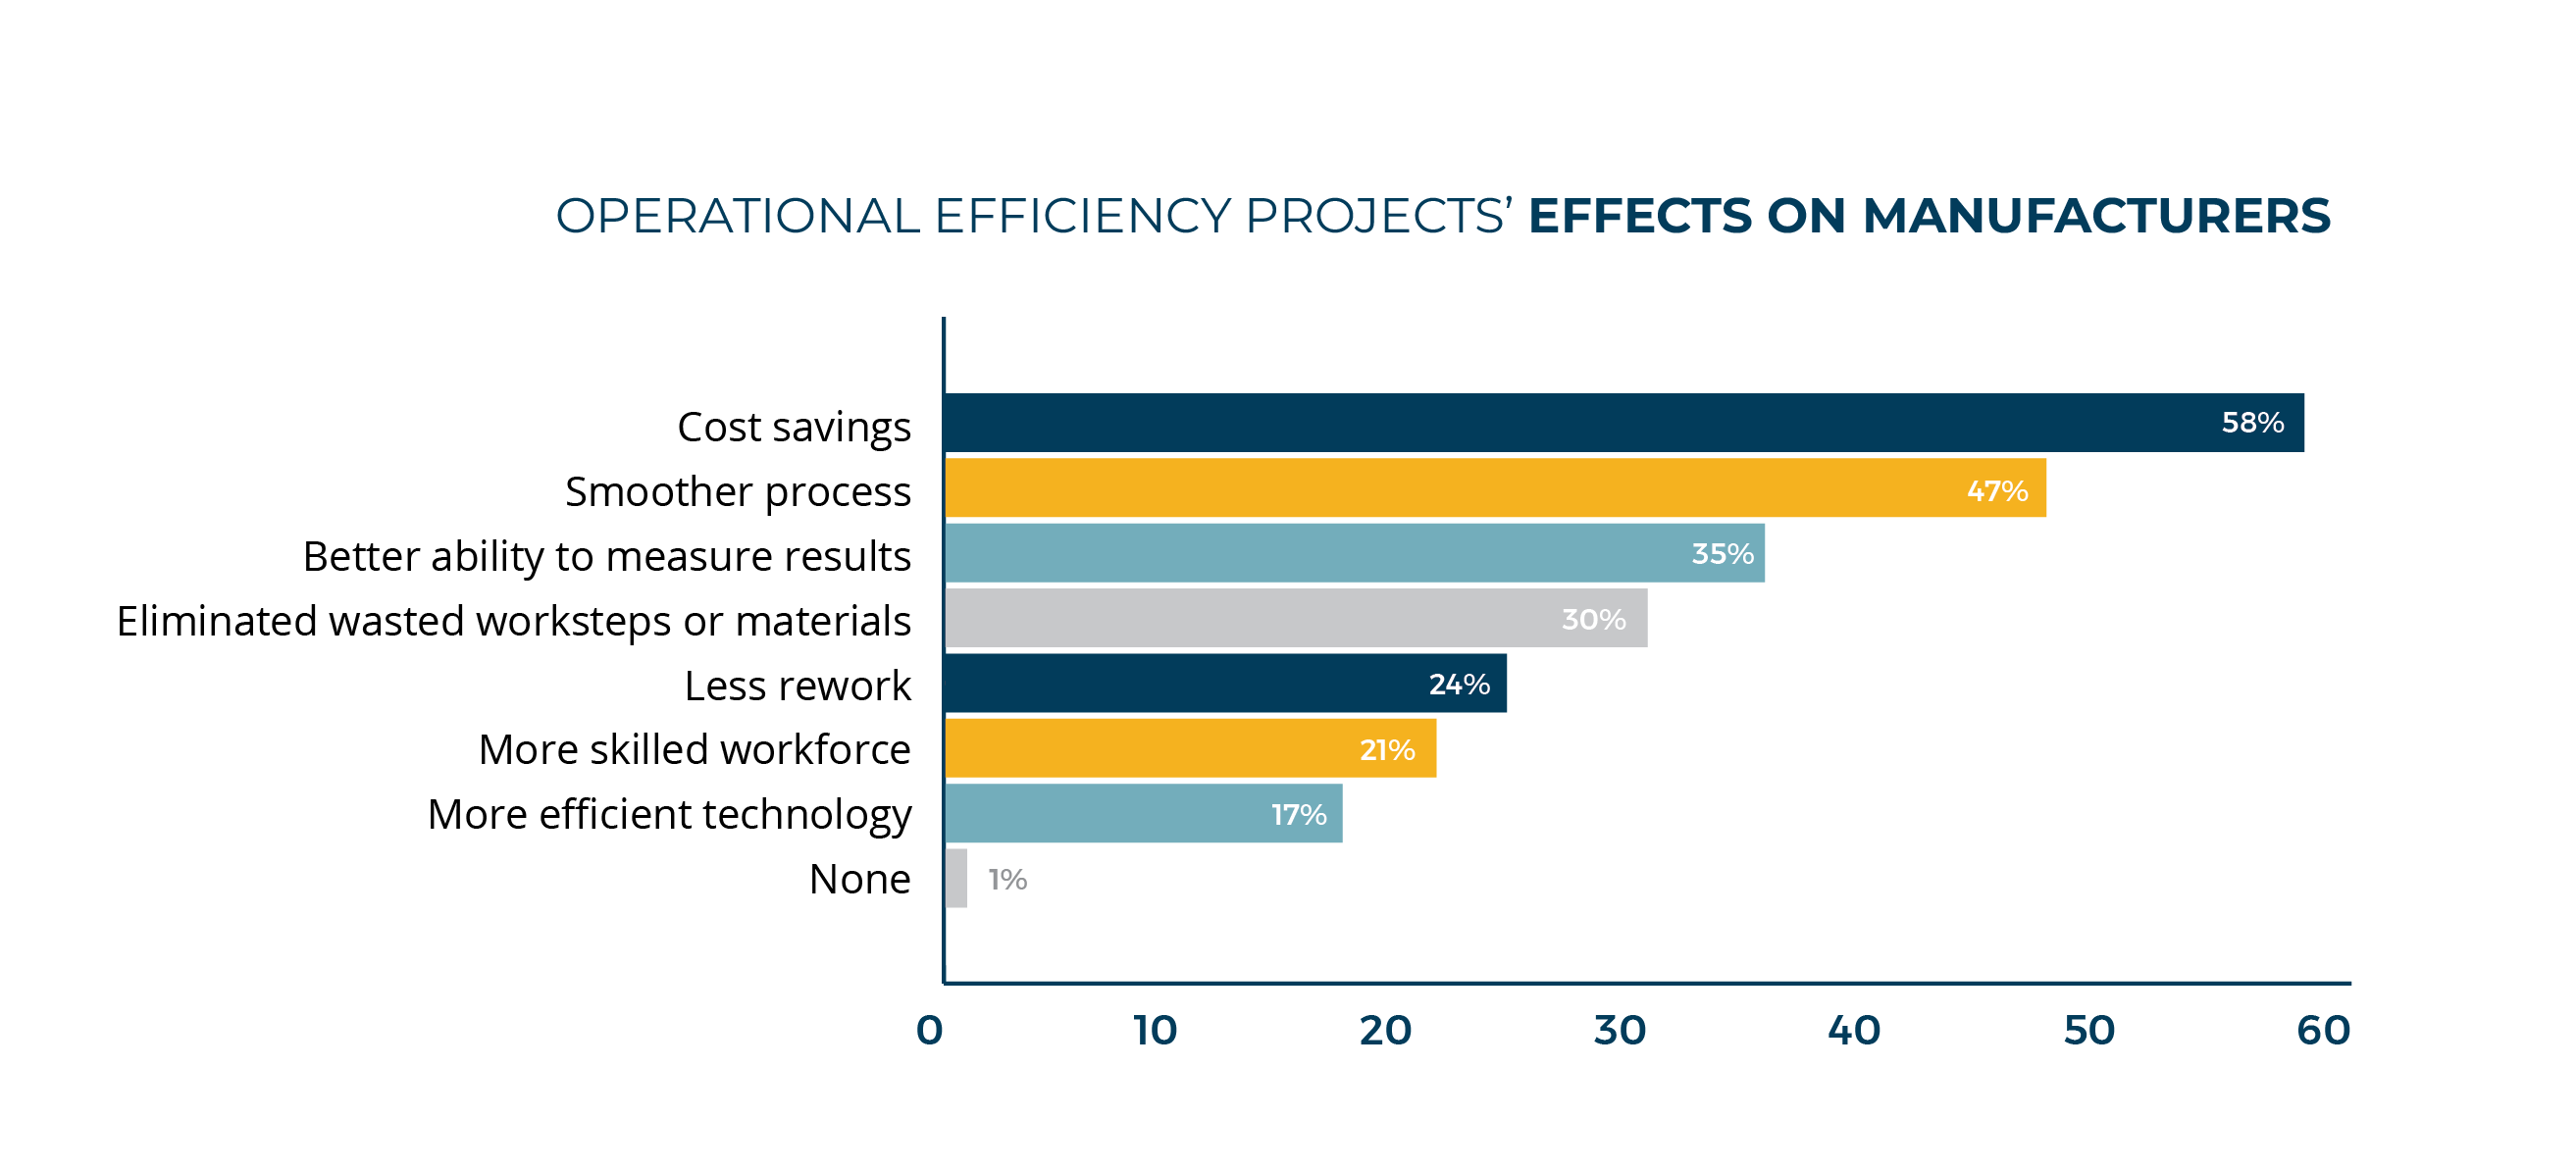 Operational Efficiency Projects' Effects on Manufacturers